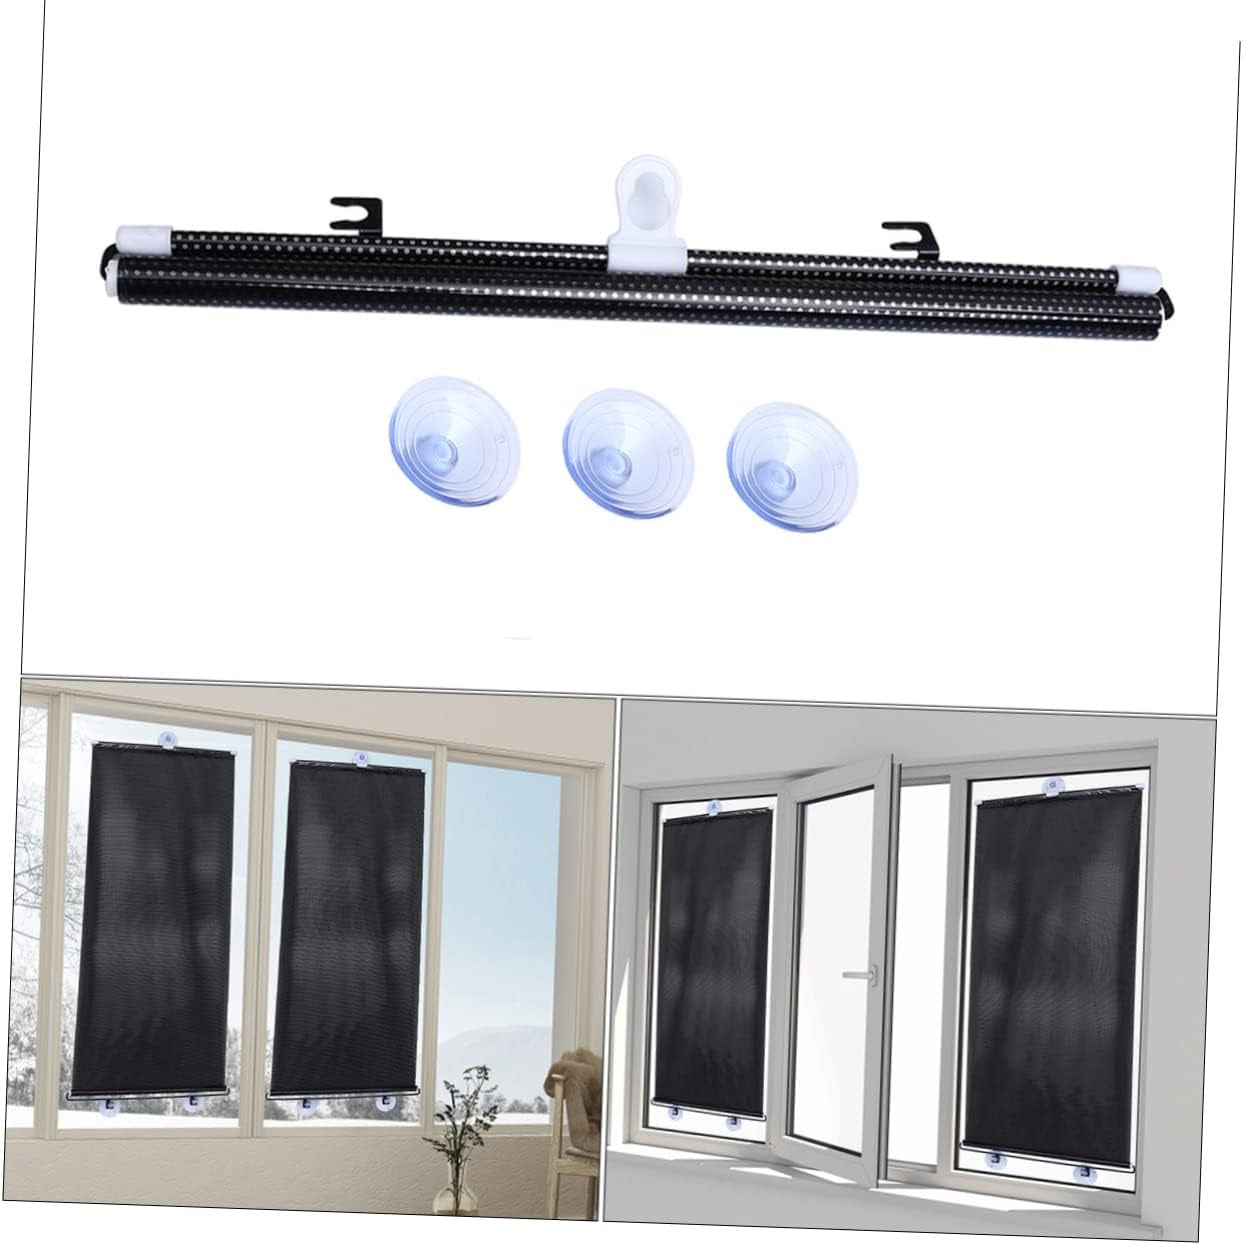 Artibetter Suction Cup Blinds Suction Cup Blackout Curtains Light Filtering Blinds Cordless Roller Shades Sun Blocking Curtains Balcony Suction Cup Sunshade Window Curtain Shade Roller